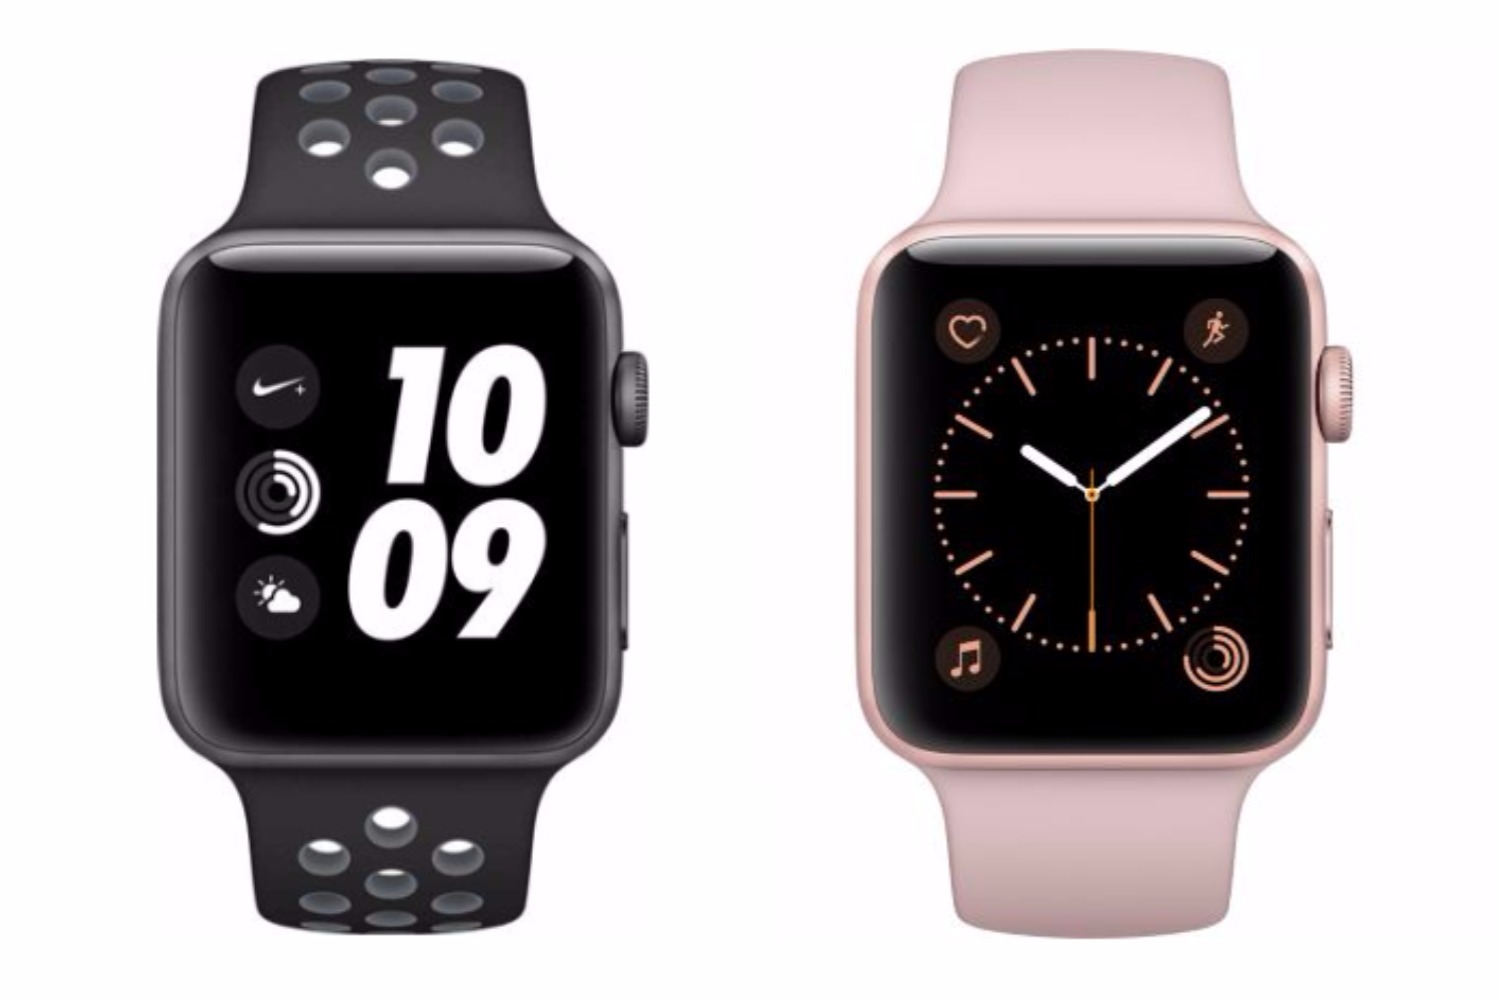 picture-of-apple-watch-series-2-photo.jpg